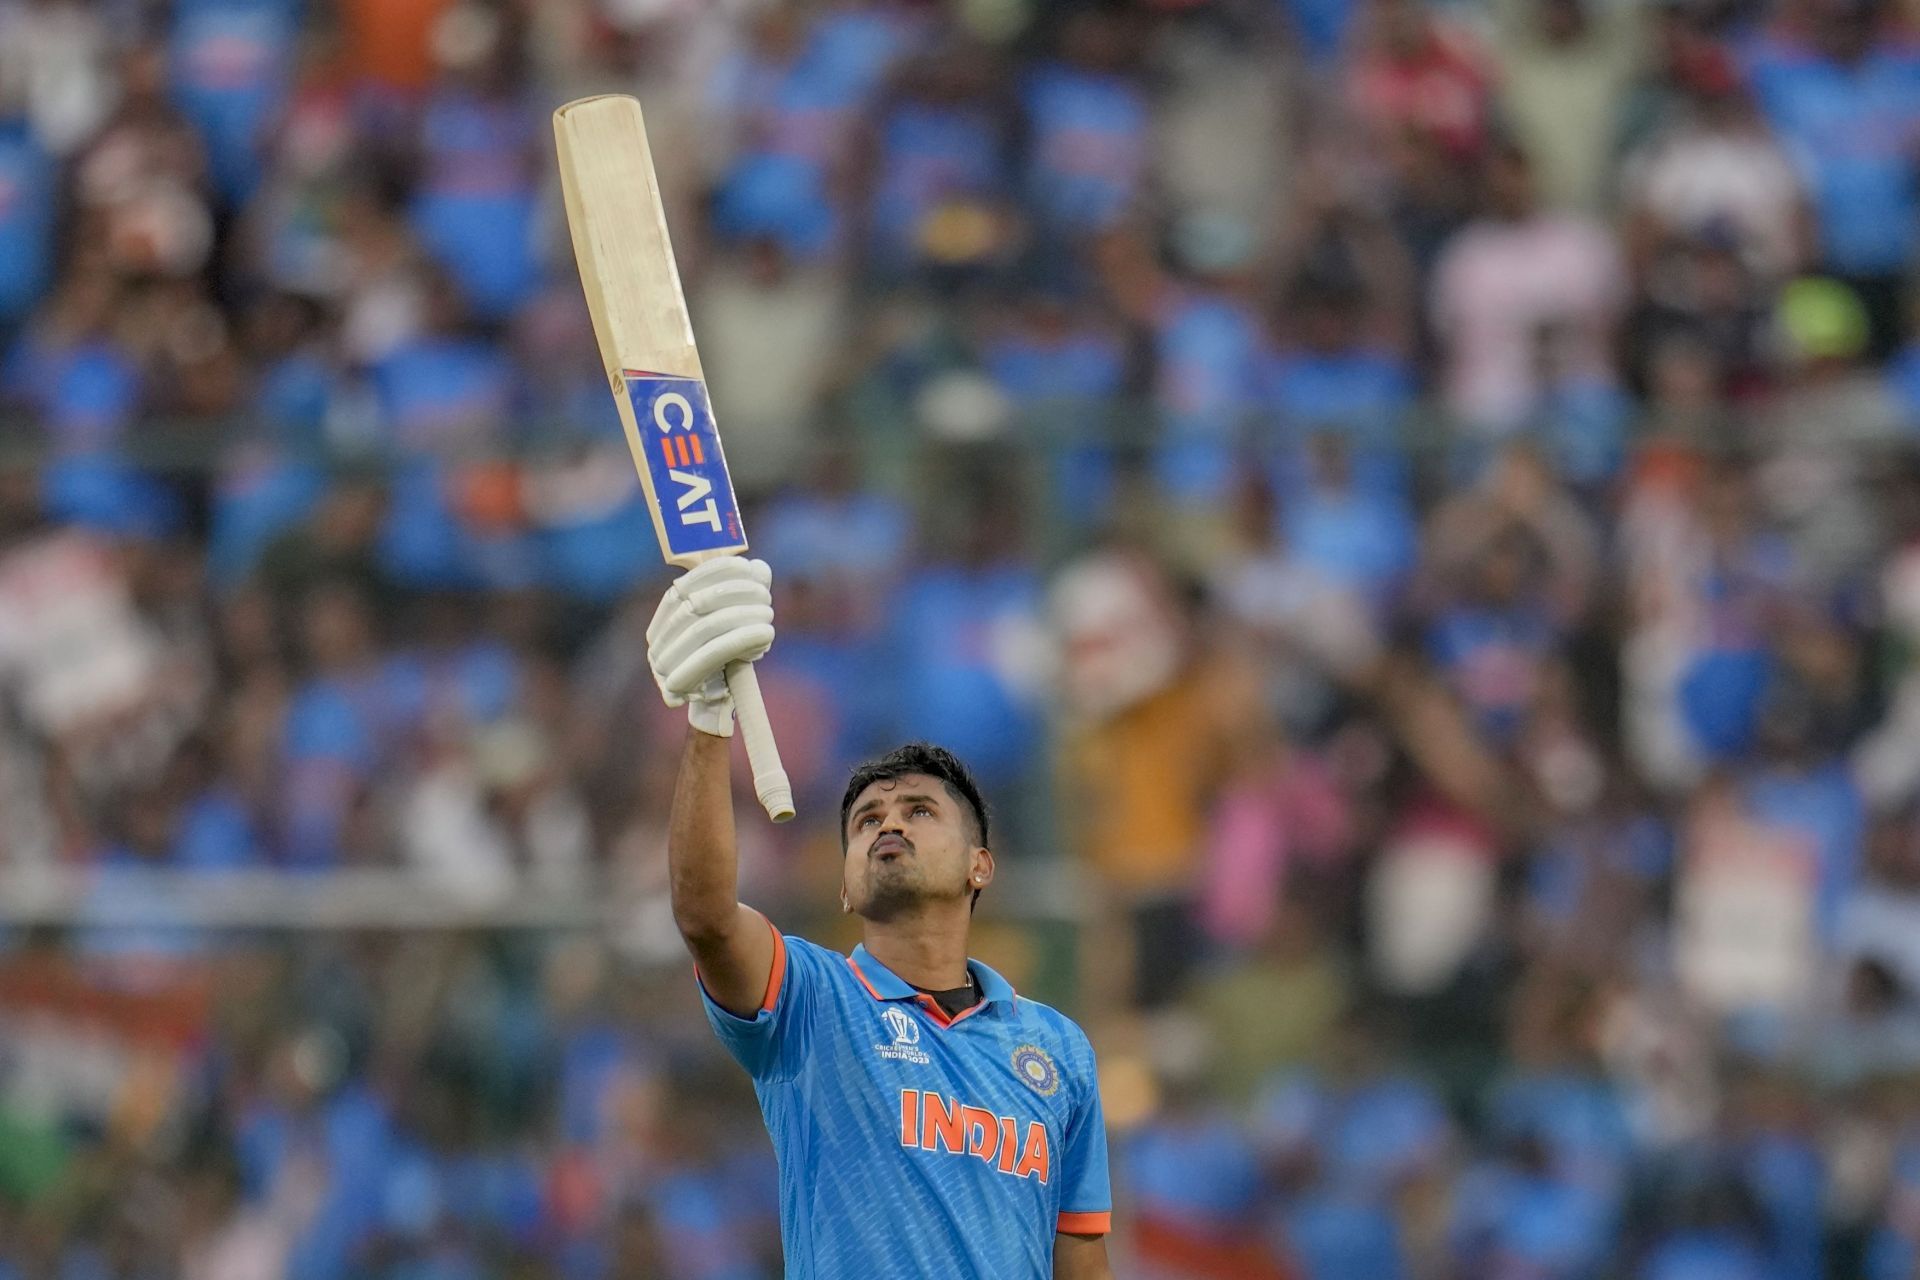 Shreyas Iyer after his maiden ODI WC hundred [Getty Images]